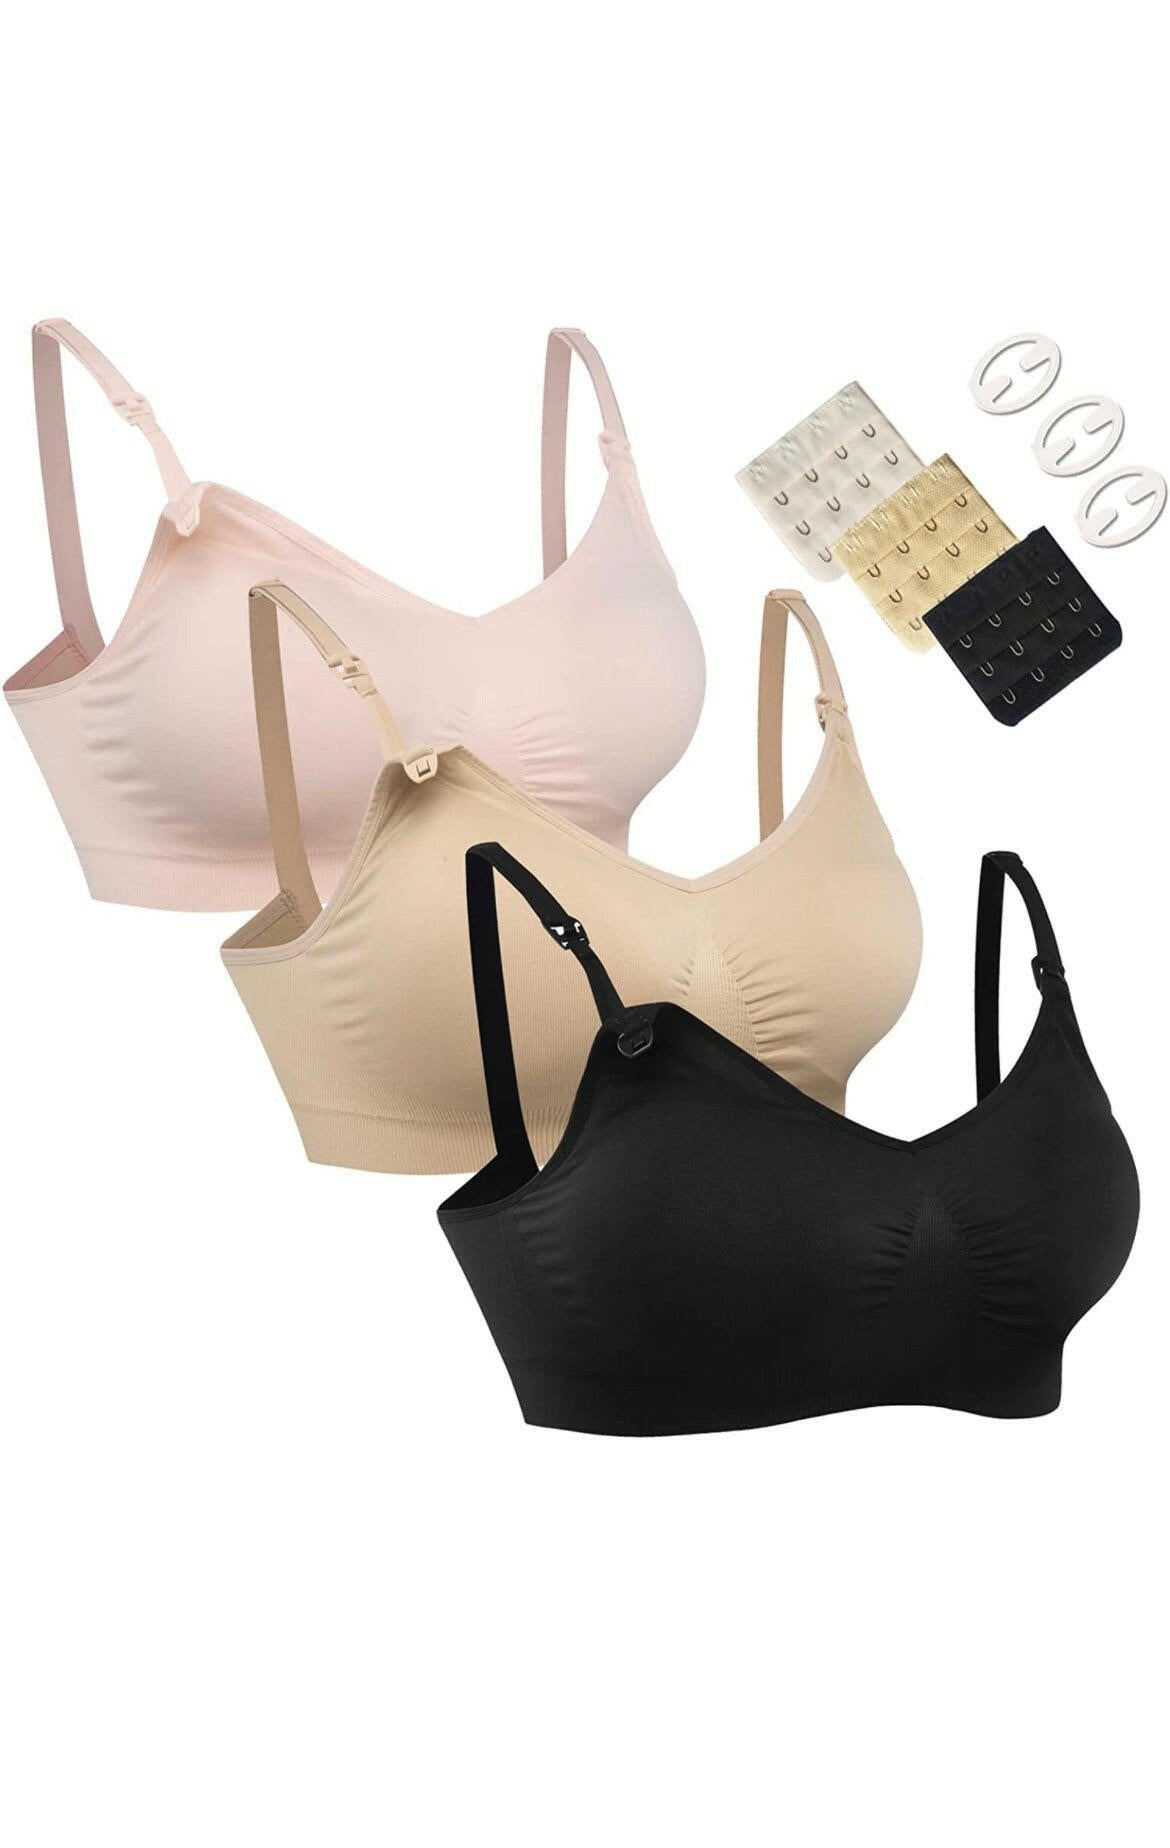 Maternity Bras for Breastfeeding with Extra Extenders and Clips by HOFISH, 3 PK.